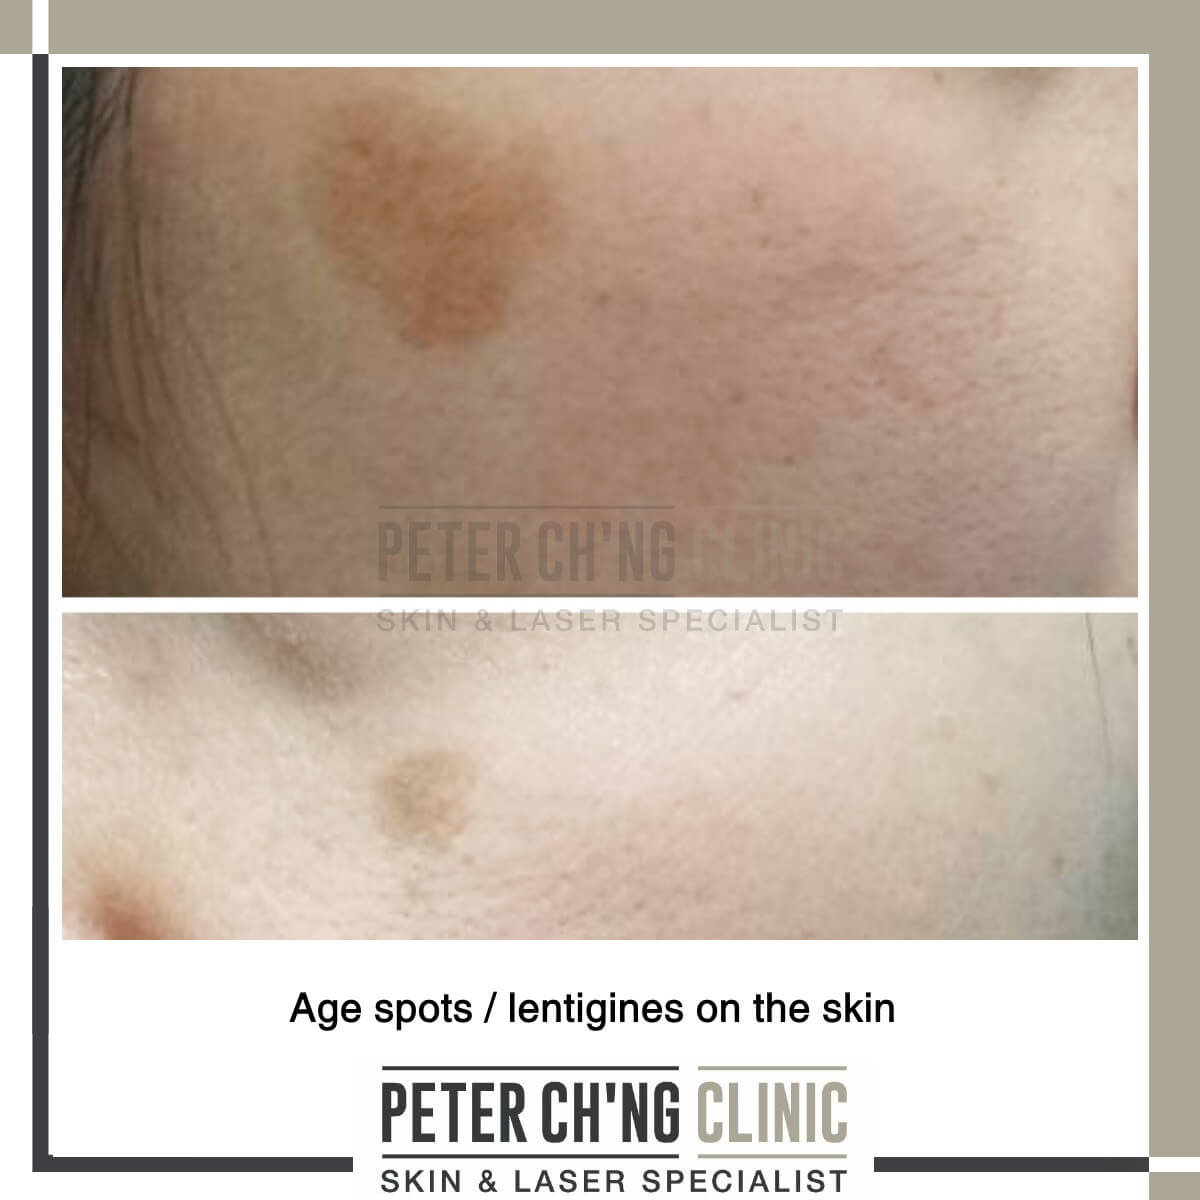 Age Spots Not Necessarily Due To Old Age Peter Ch Ng Skin Specialist Kl Malaysia